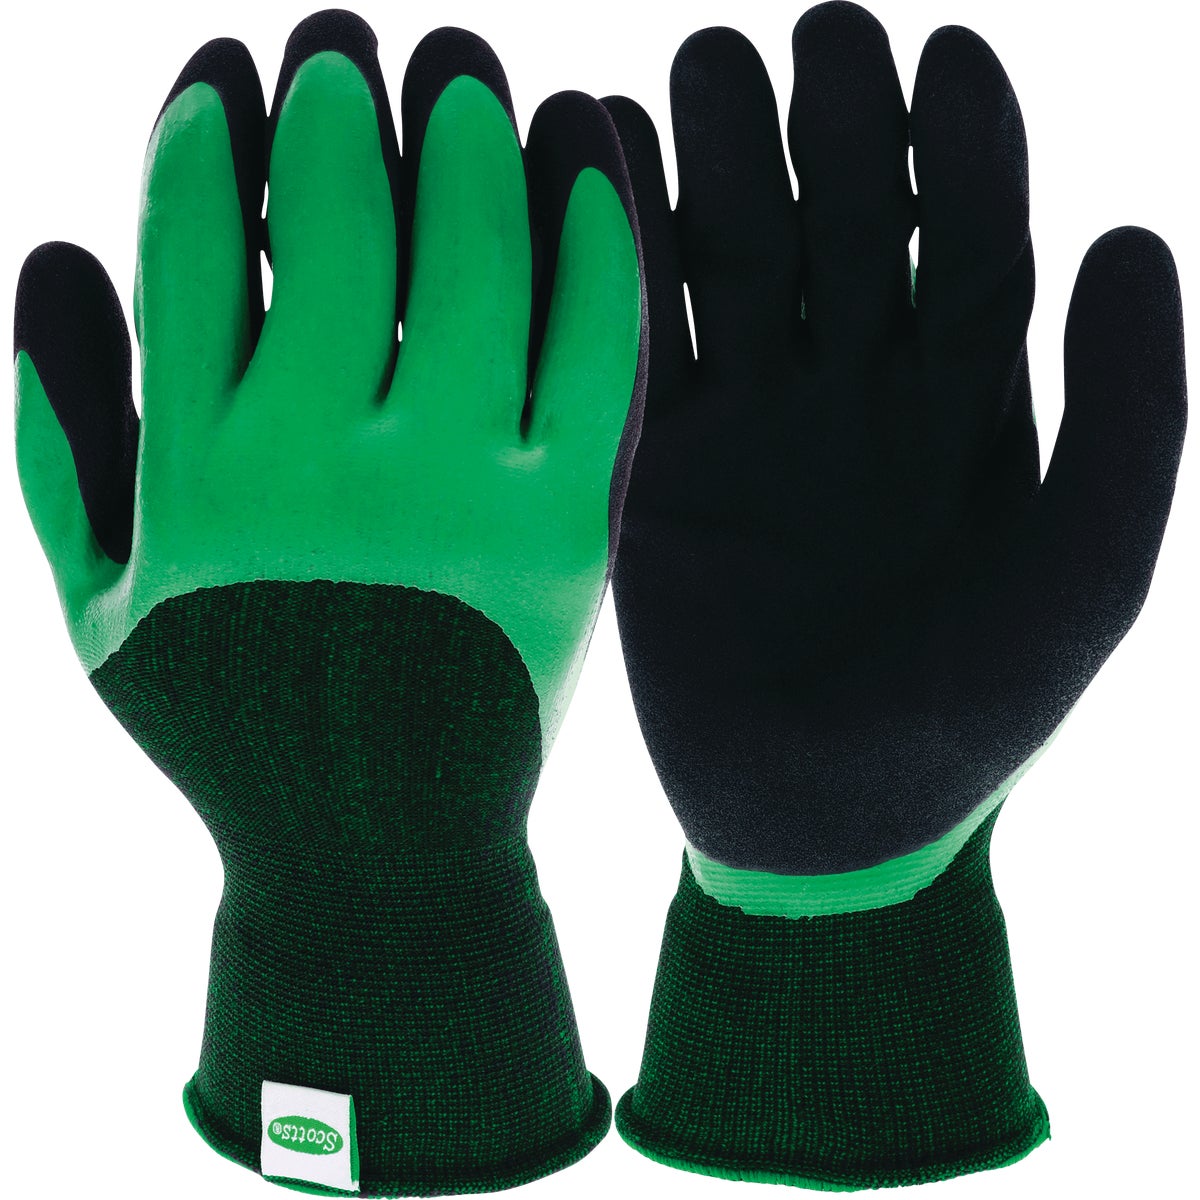 Scotts Yard Care Large Latex Dipped Green & Black Gloves